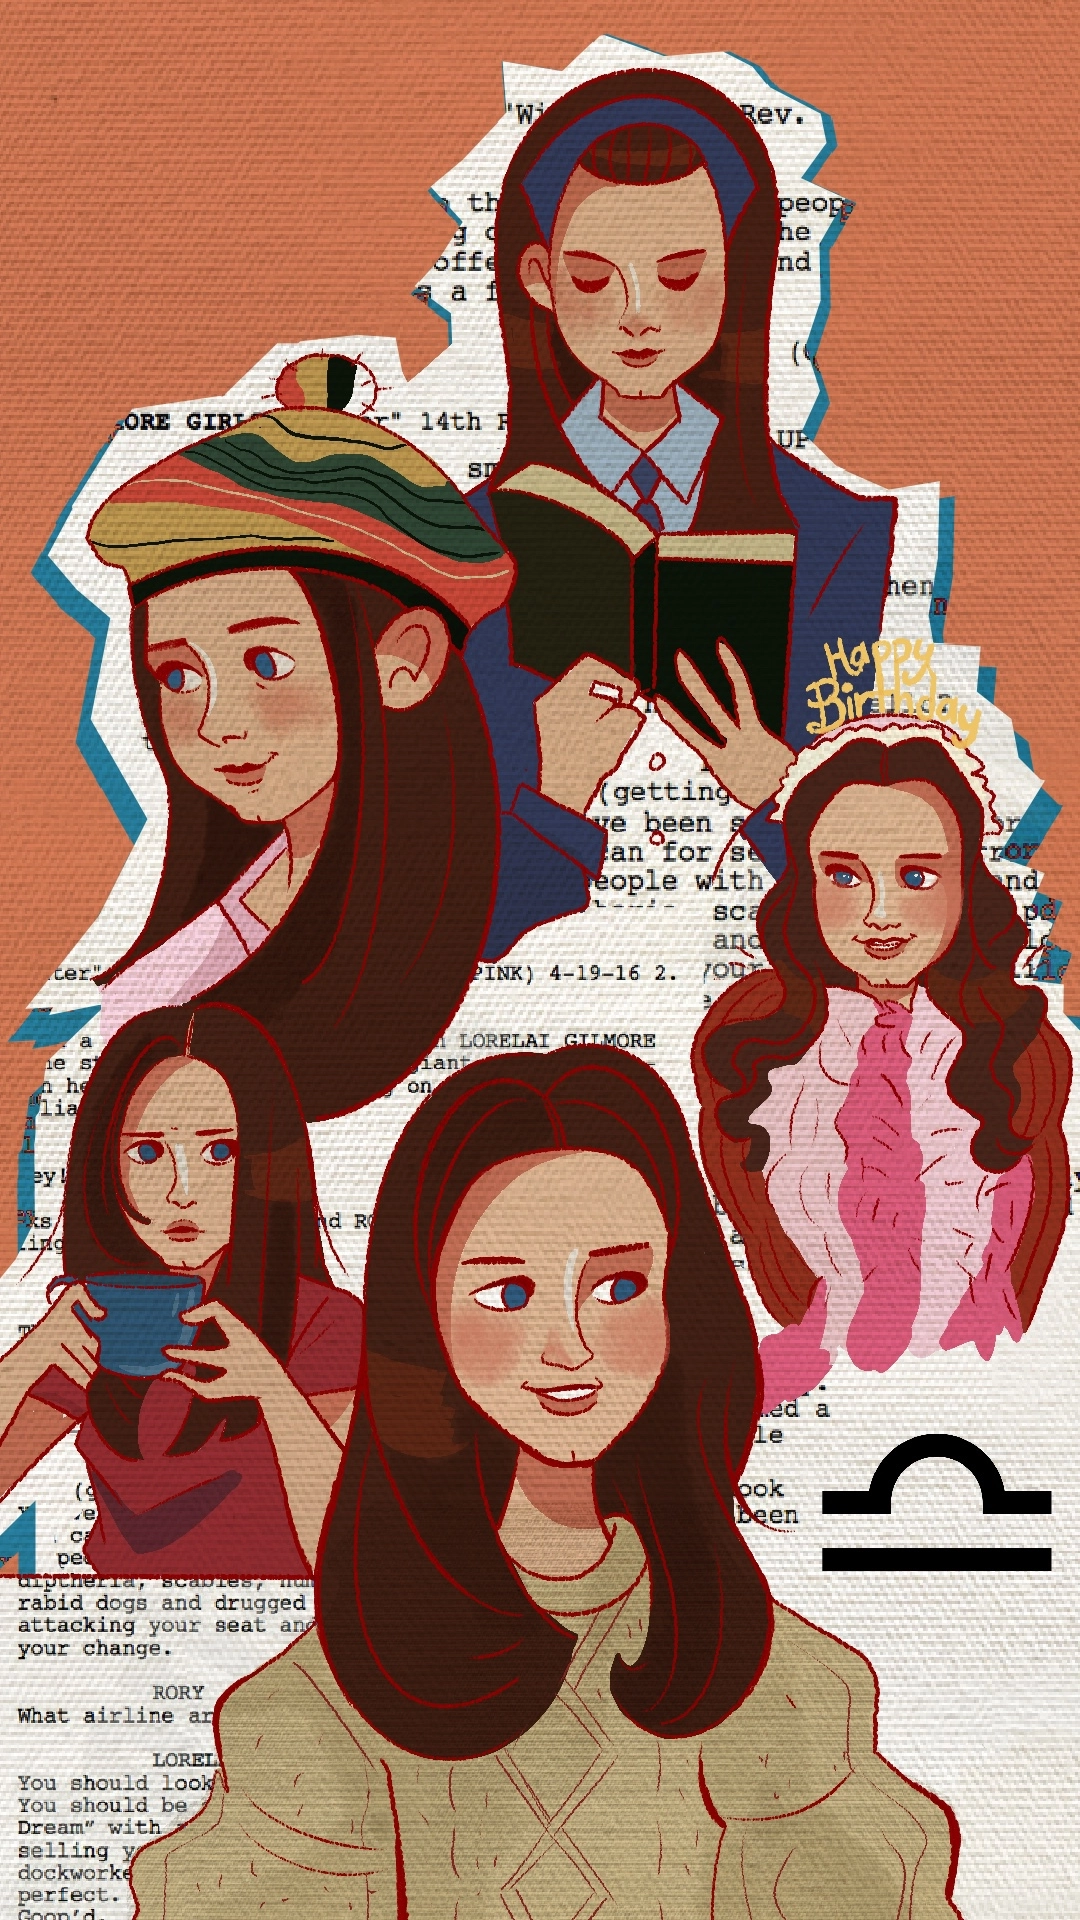 Gilmore Girls: The Complete Evolution Of Rory